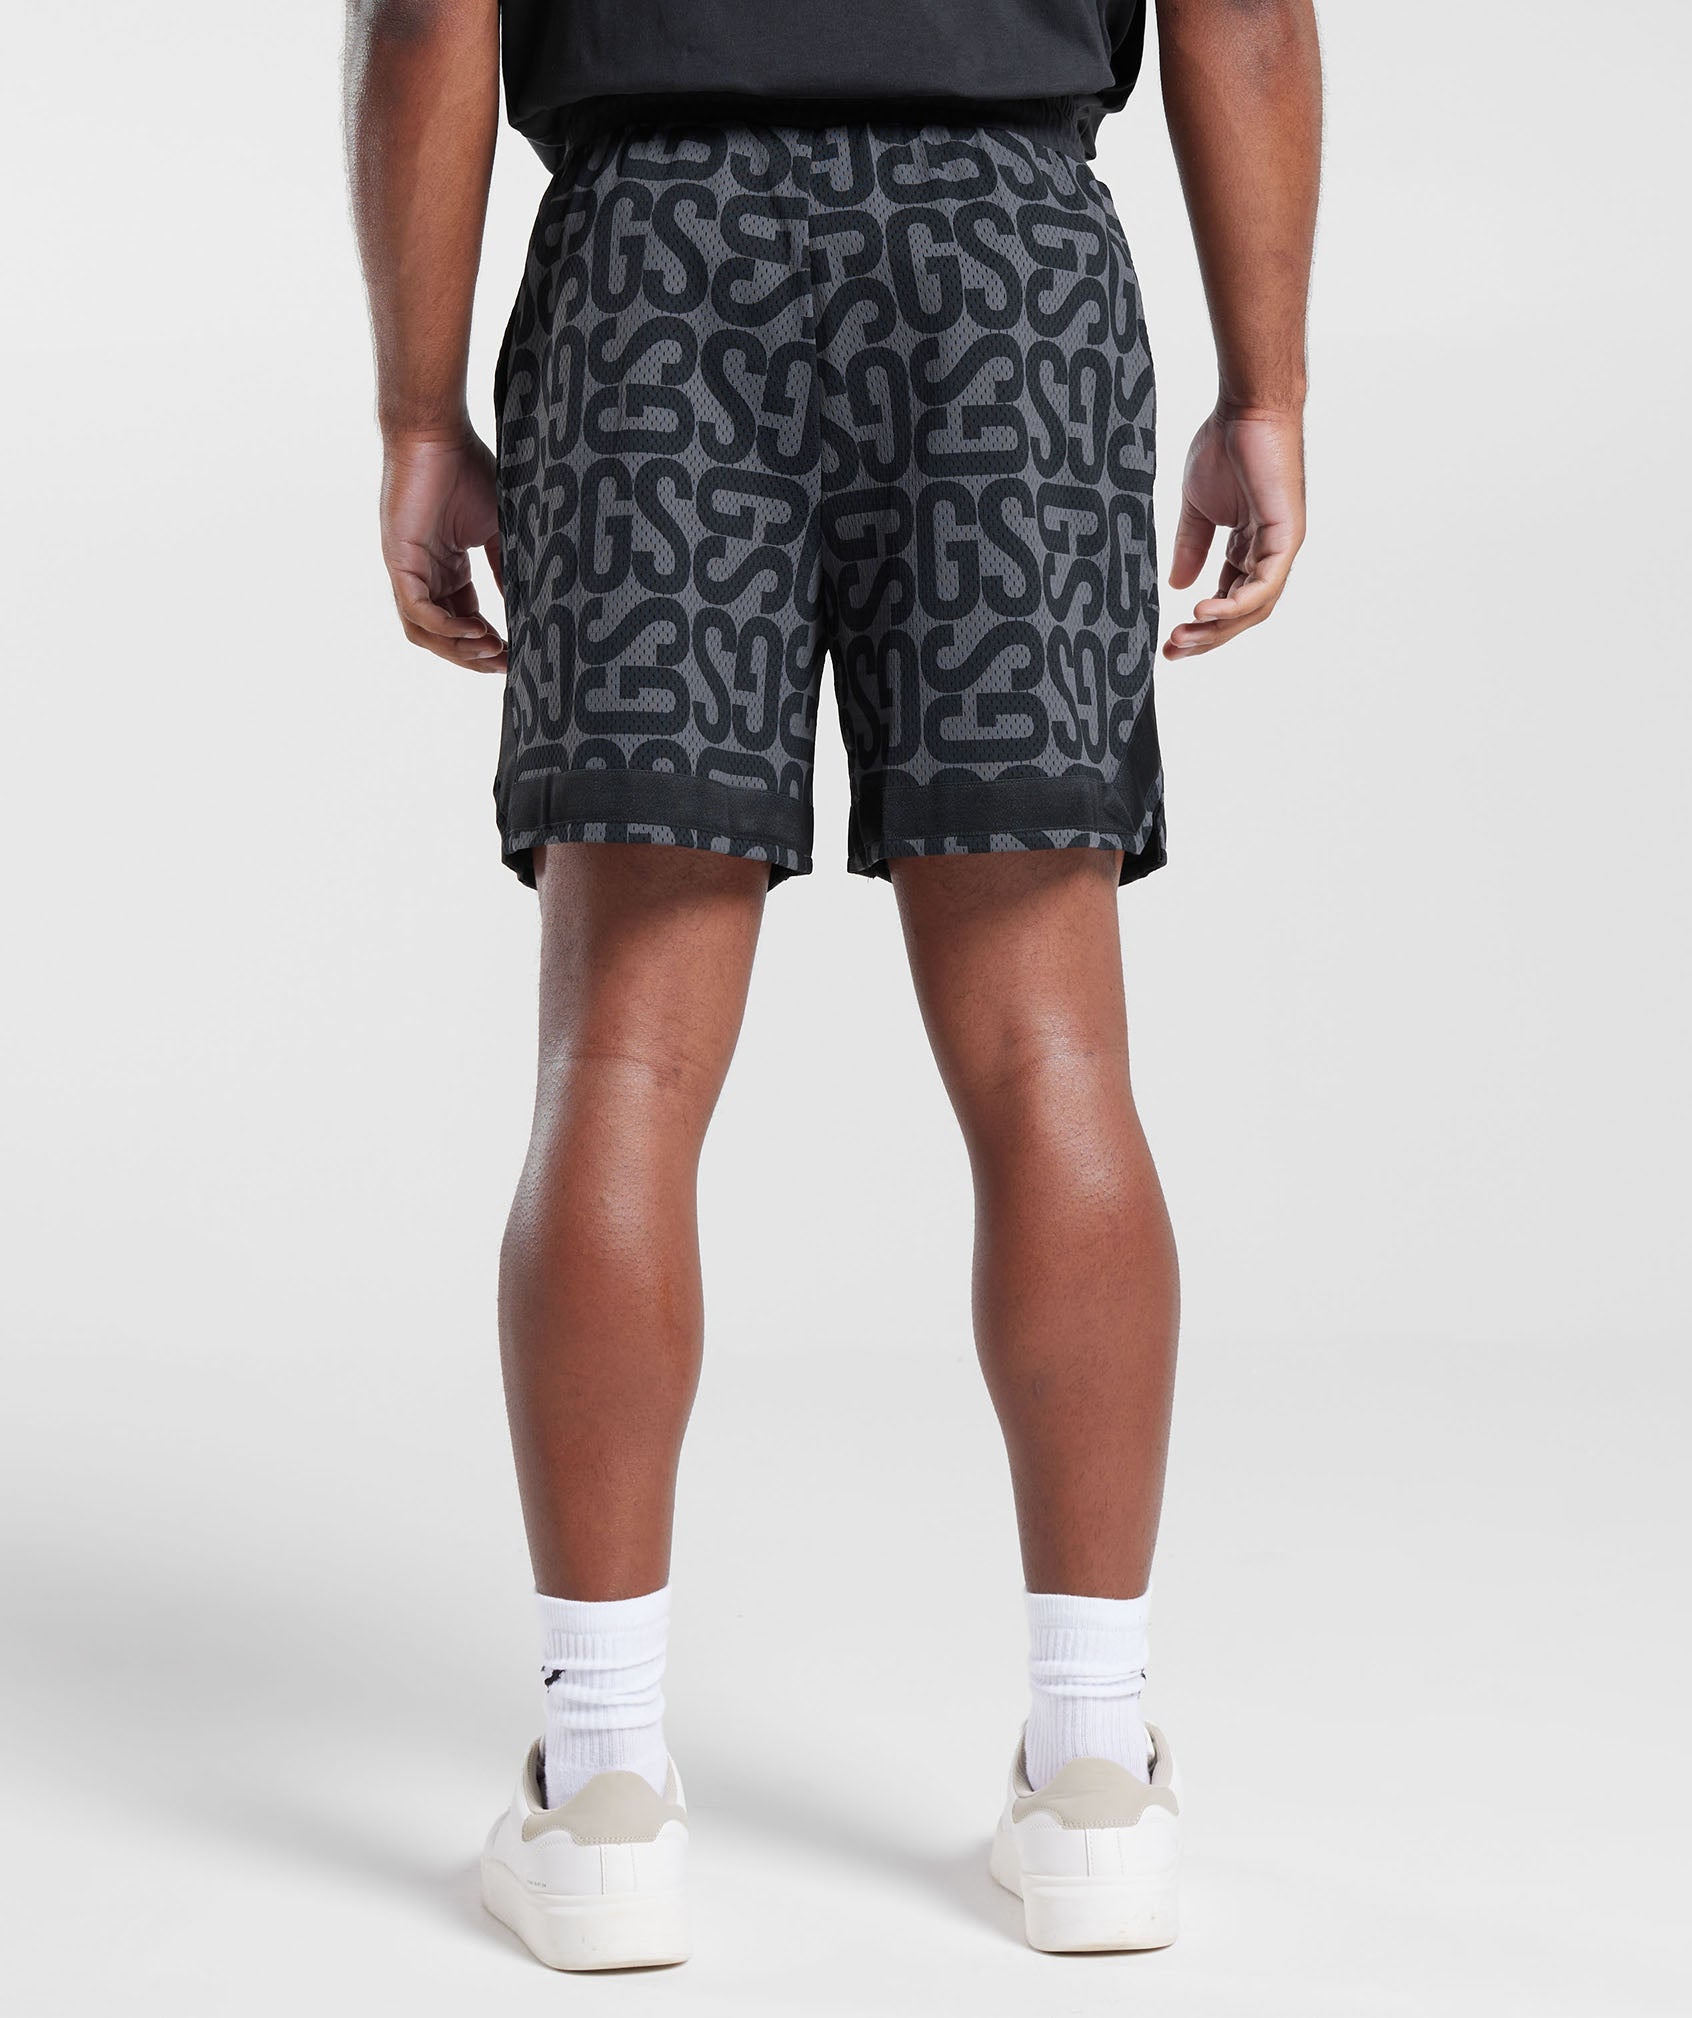 Rest Day Shorts in Black/Onyx Grey - view 2